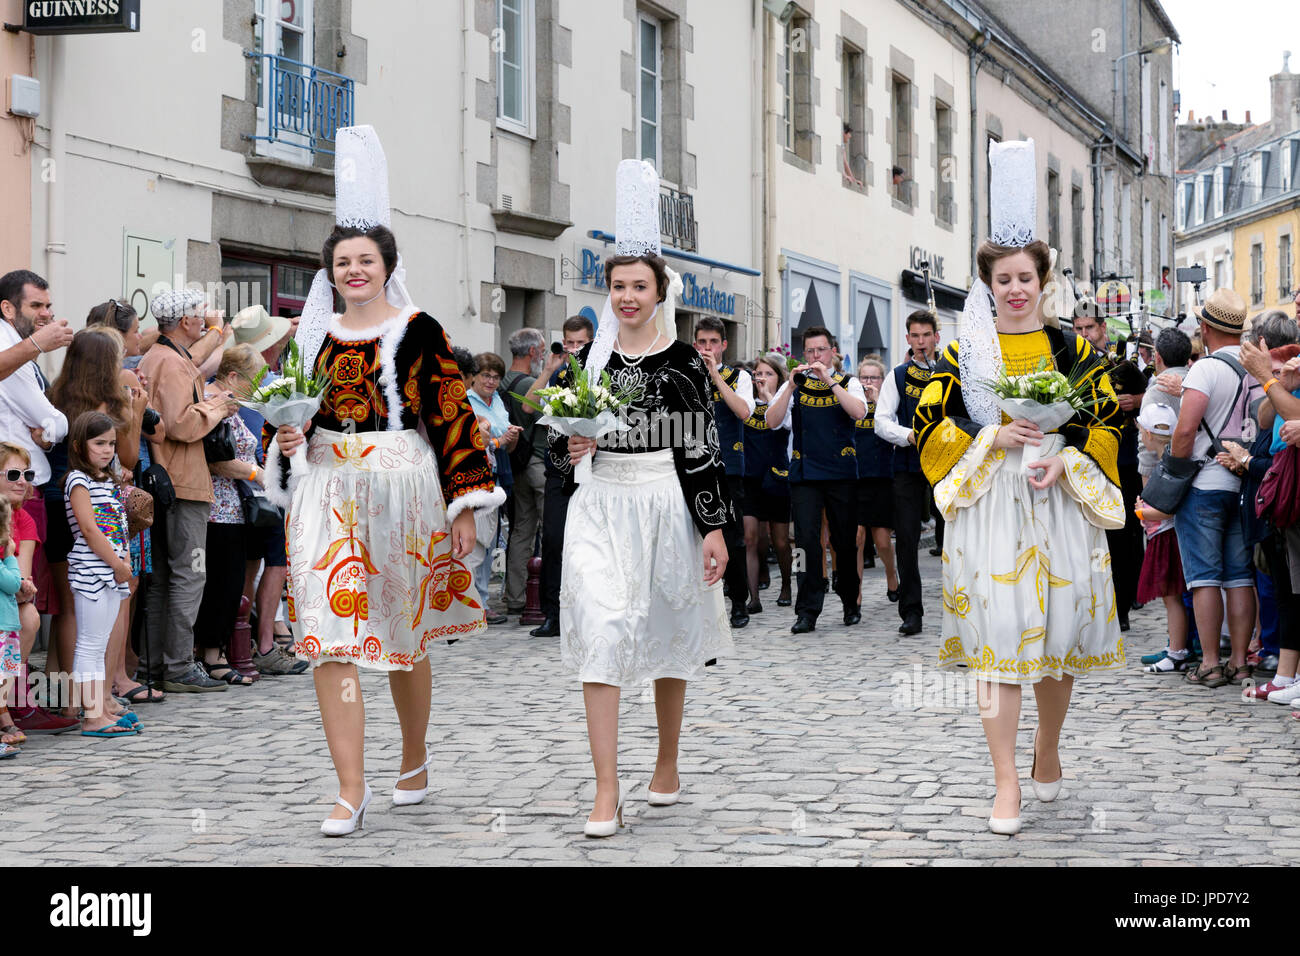 Brittany France - women in traditional costume and hats parading in the streets of Pont l'Abbe for the Fete des Brodeuses festival, Brittany France Stock Photo